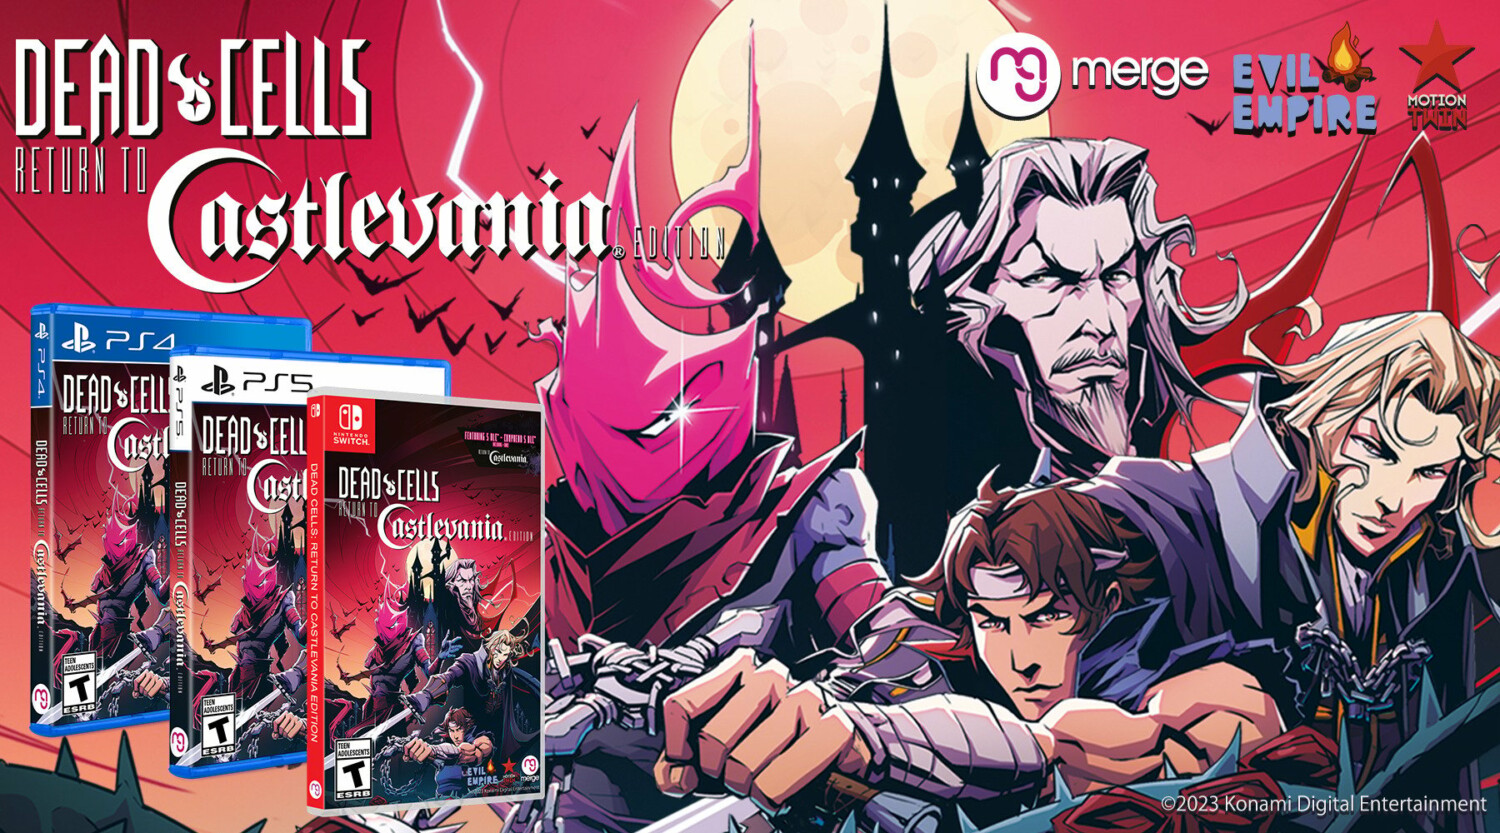 Dead Cells: Return to Castlevania Physical Edition Confirmed For